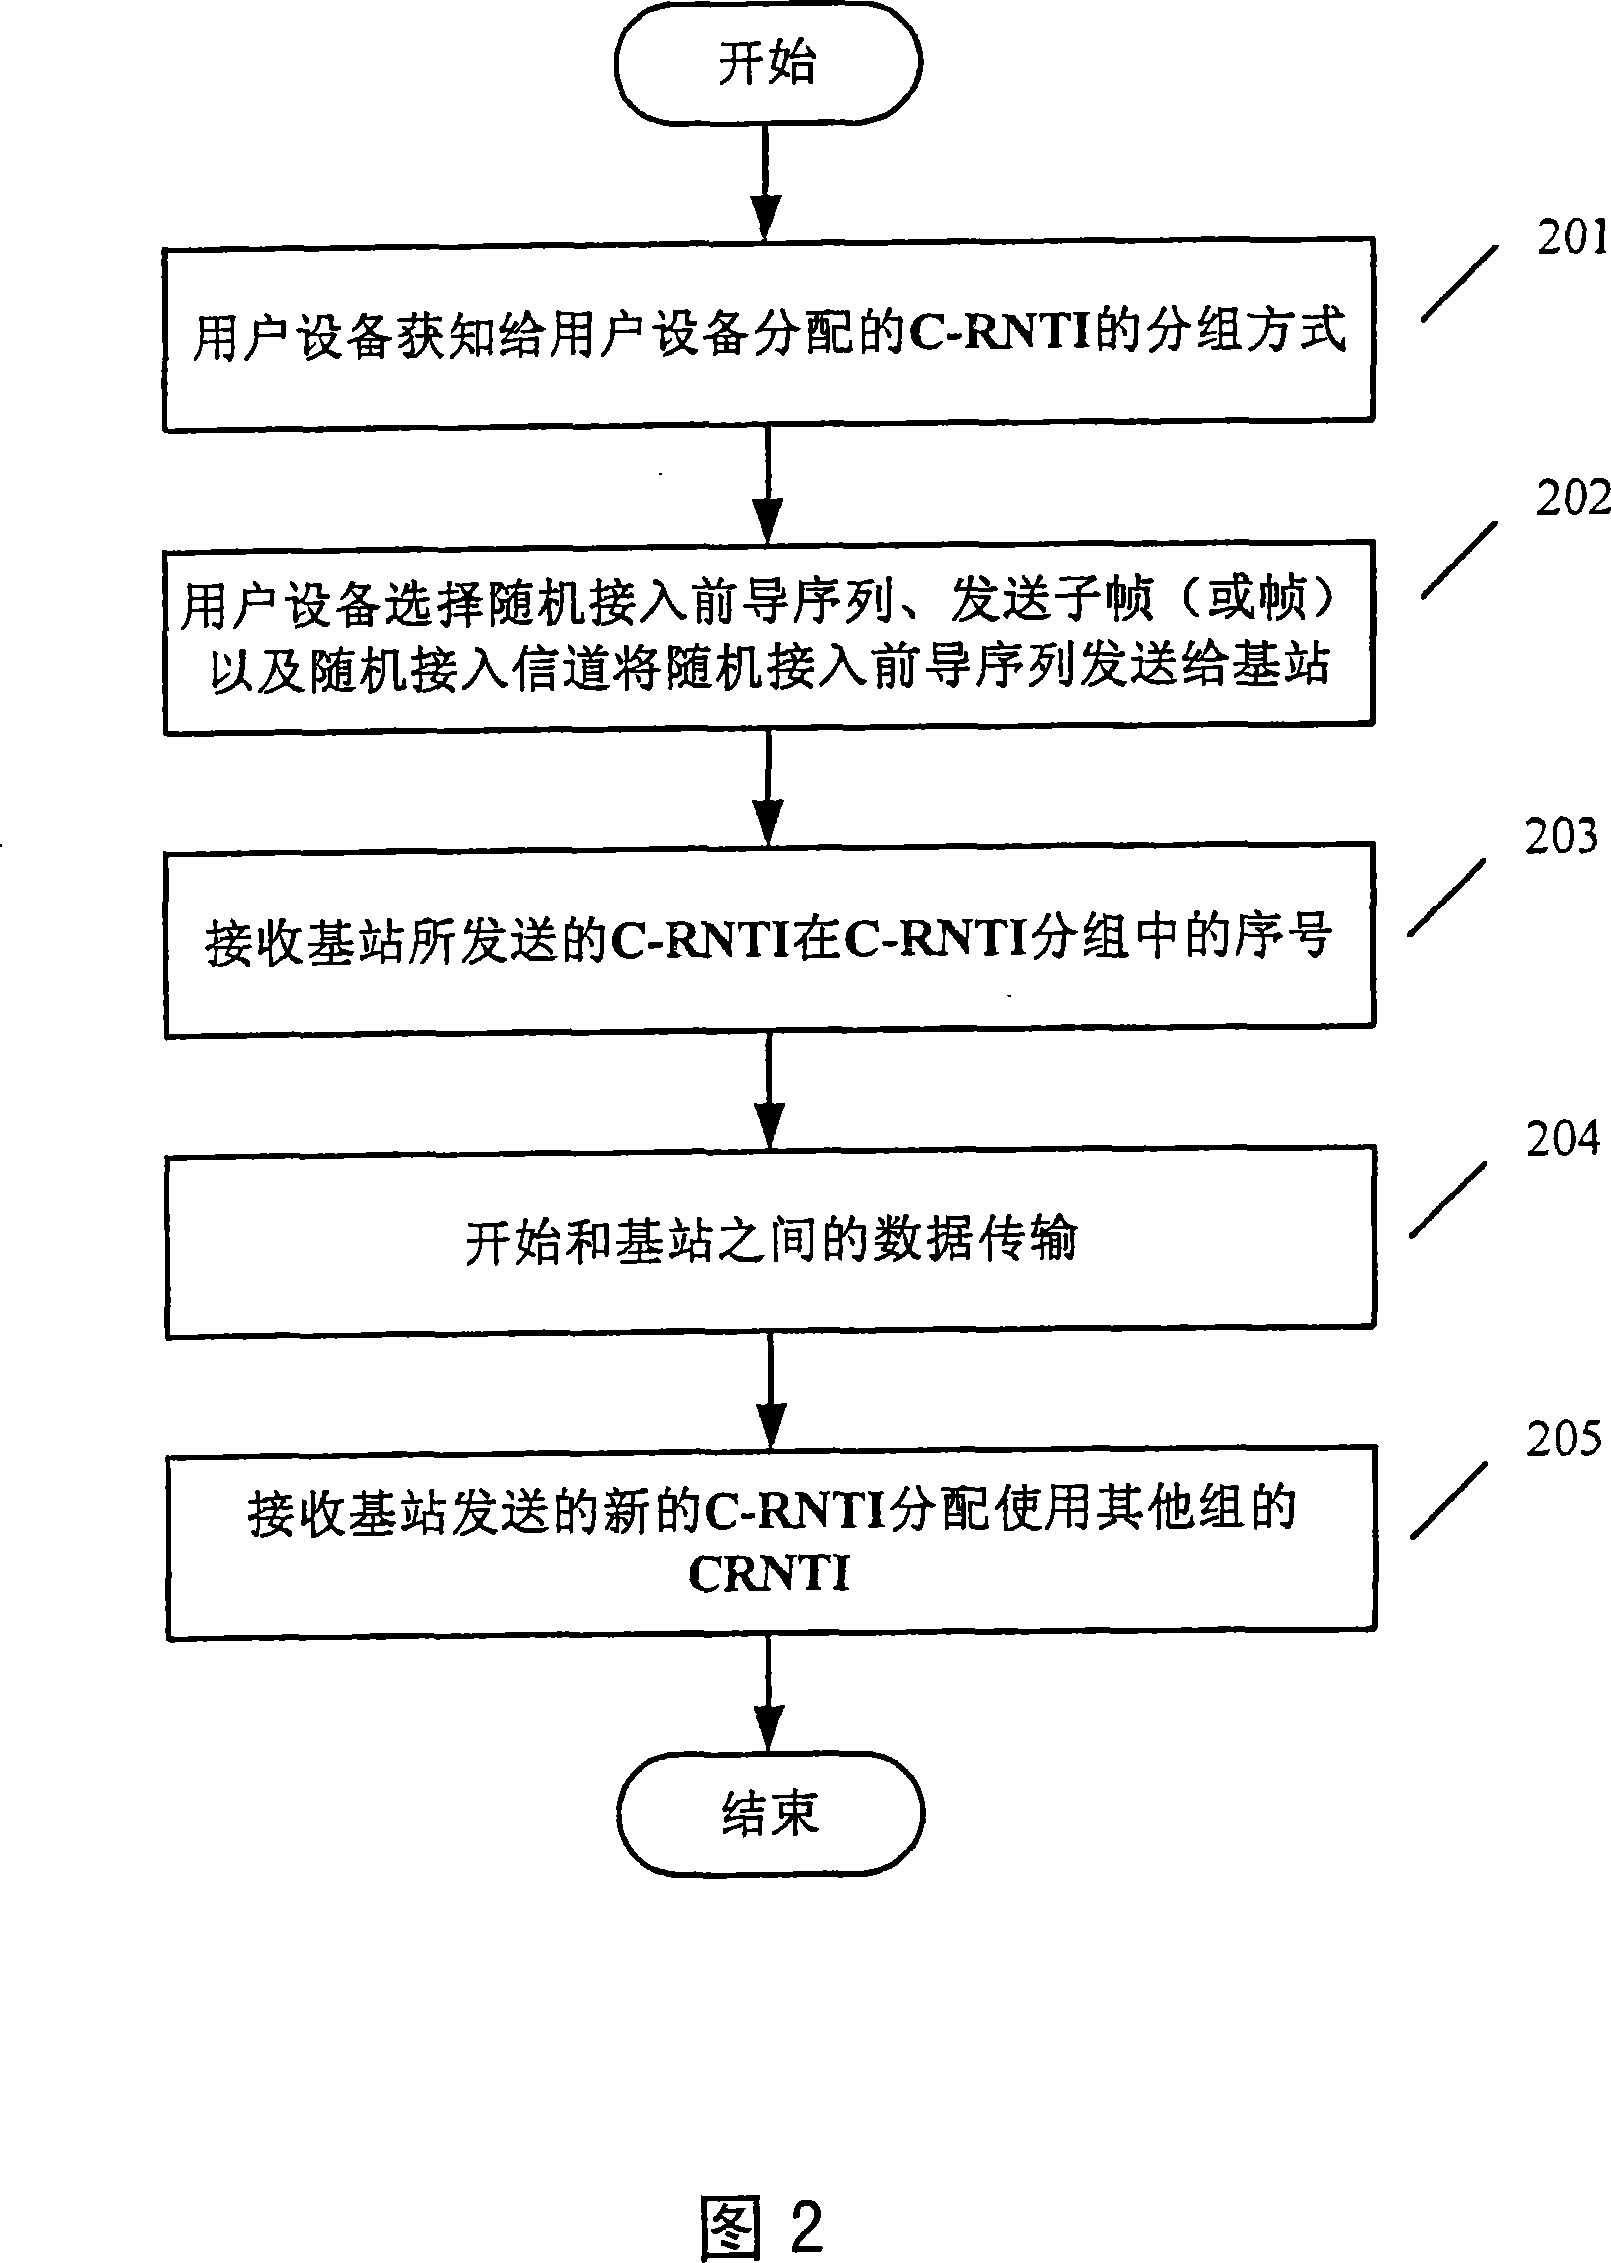 Method and device for distributing temporary recognition number of subdistrict wireless network